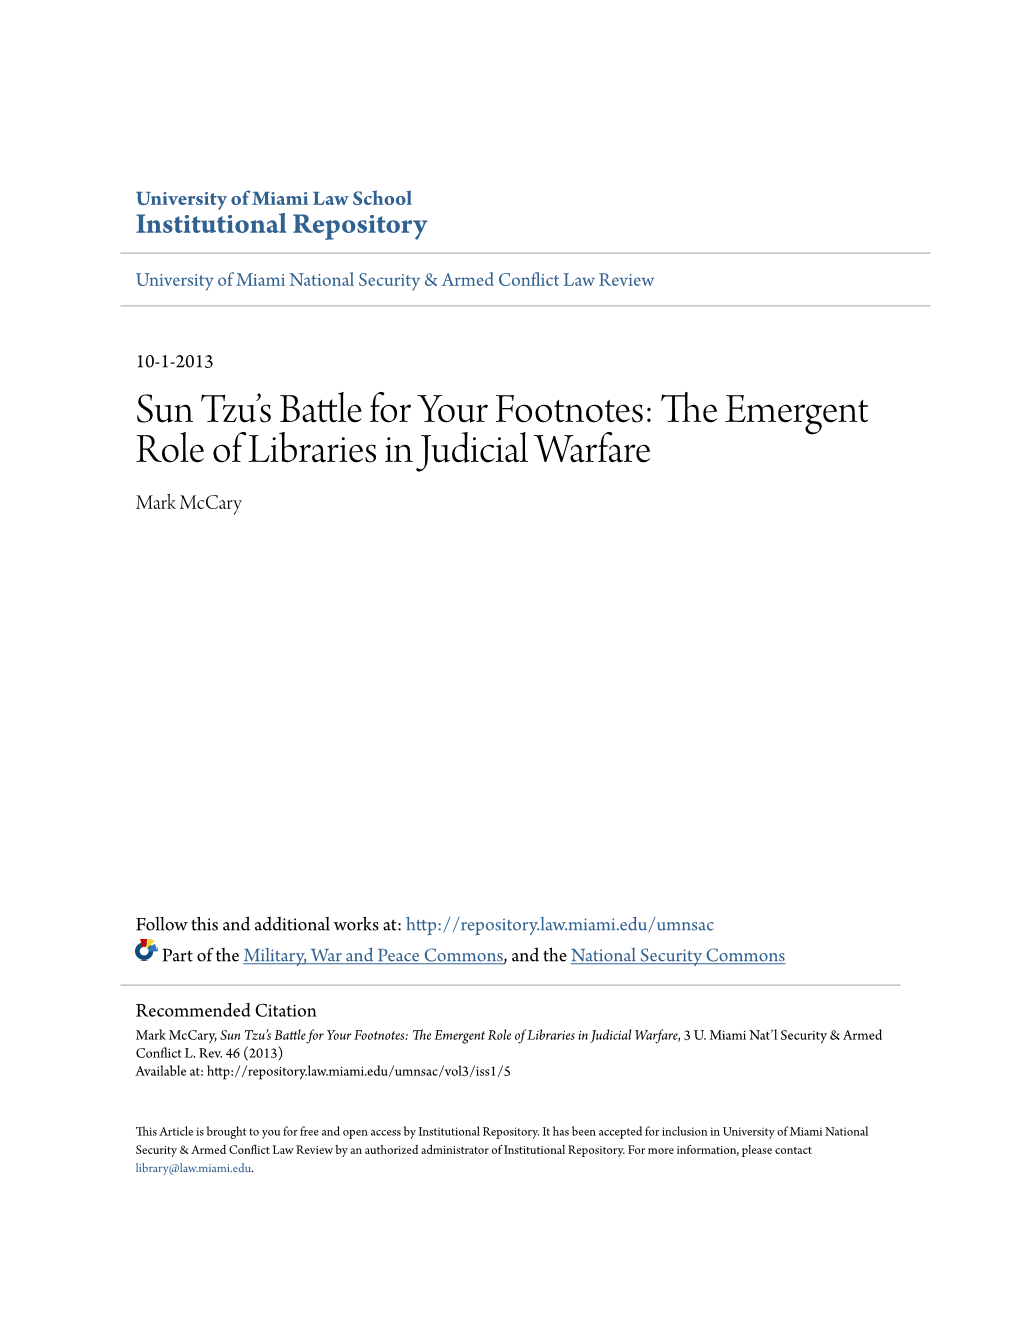 The Emergent Role of Libraries in Judicial Warfare, 3 U